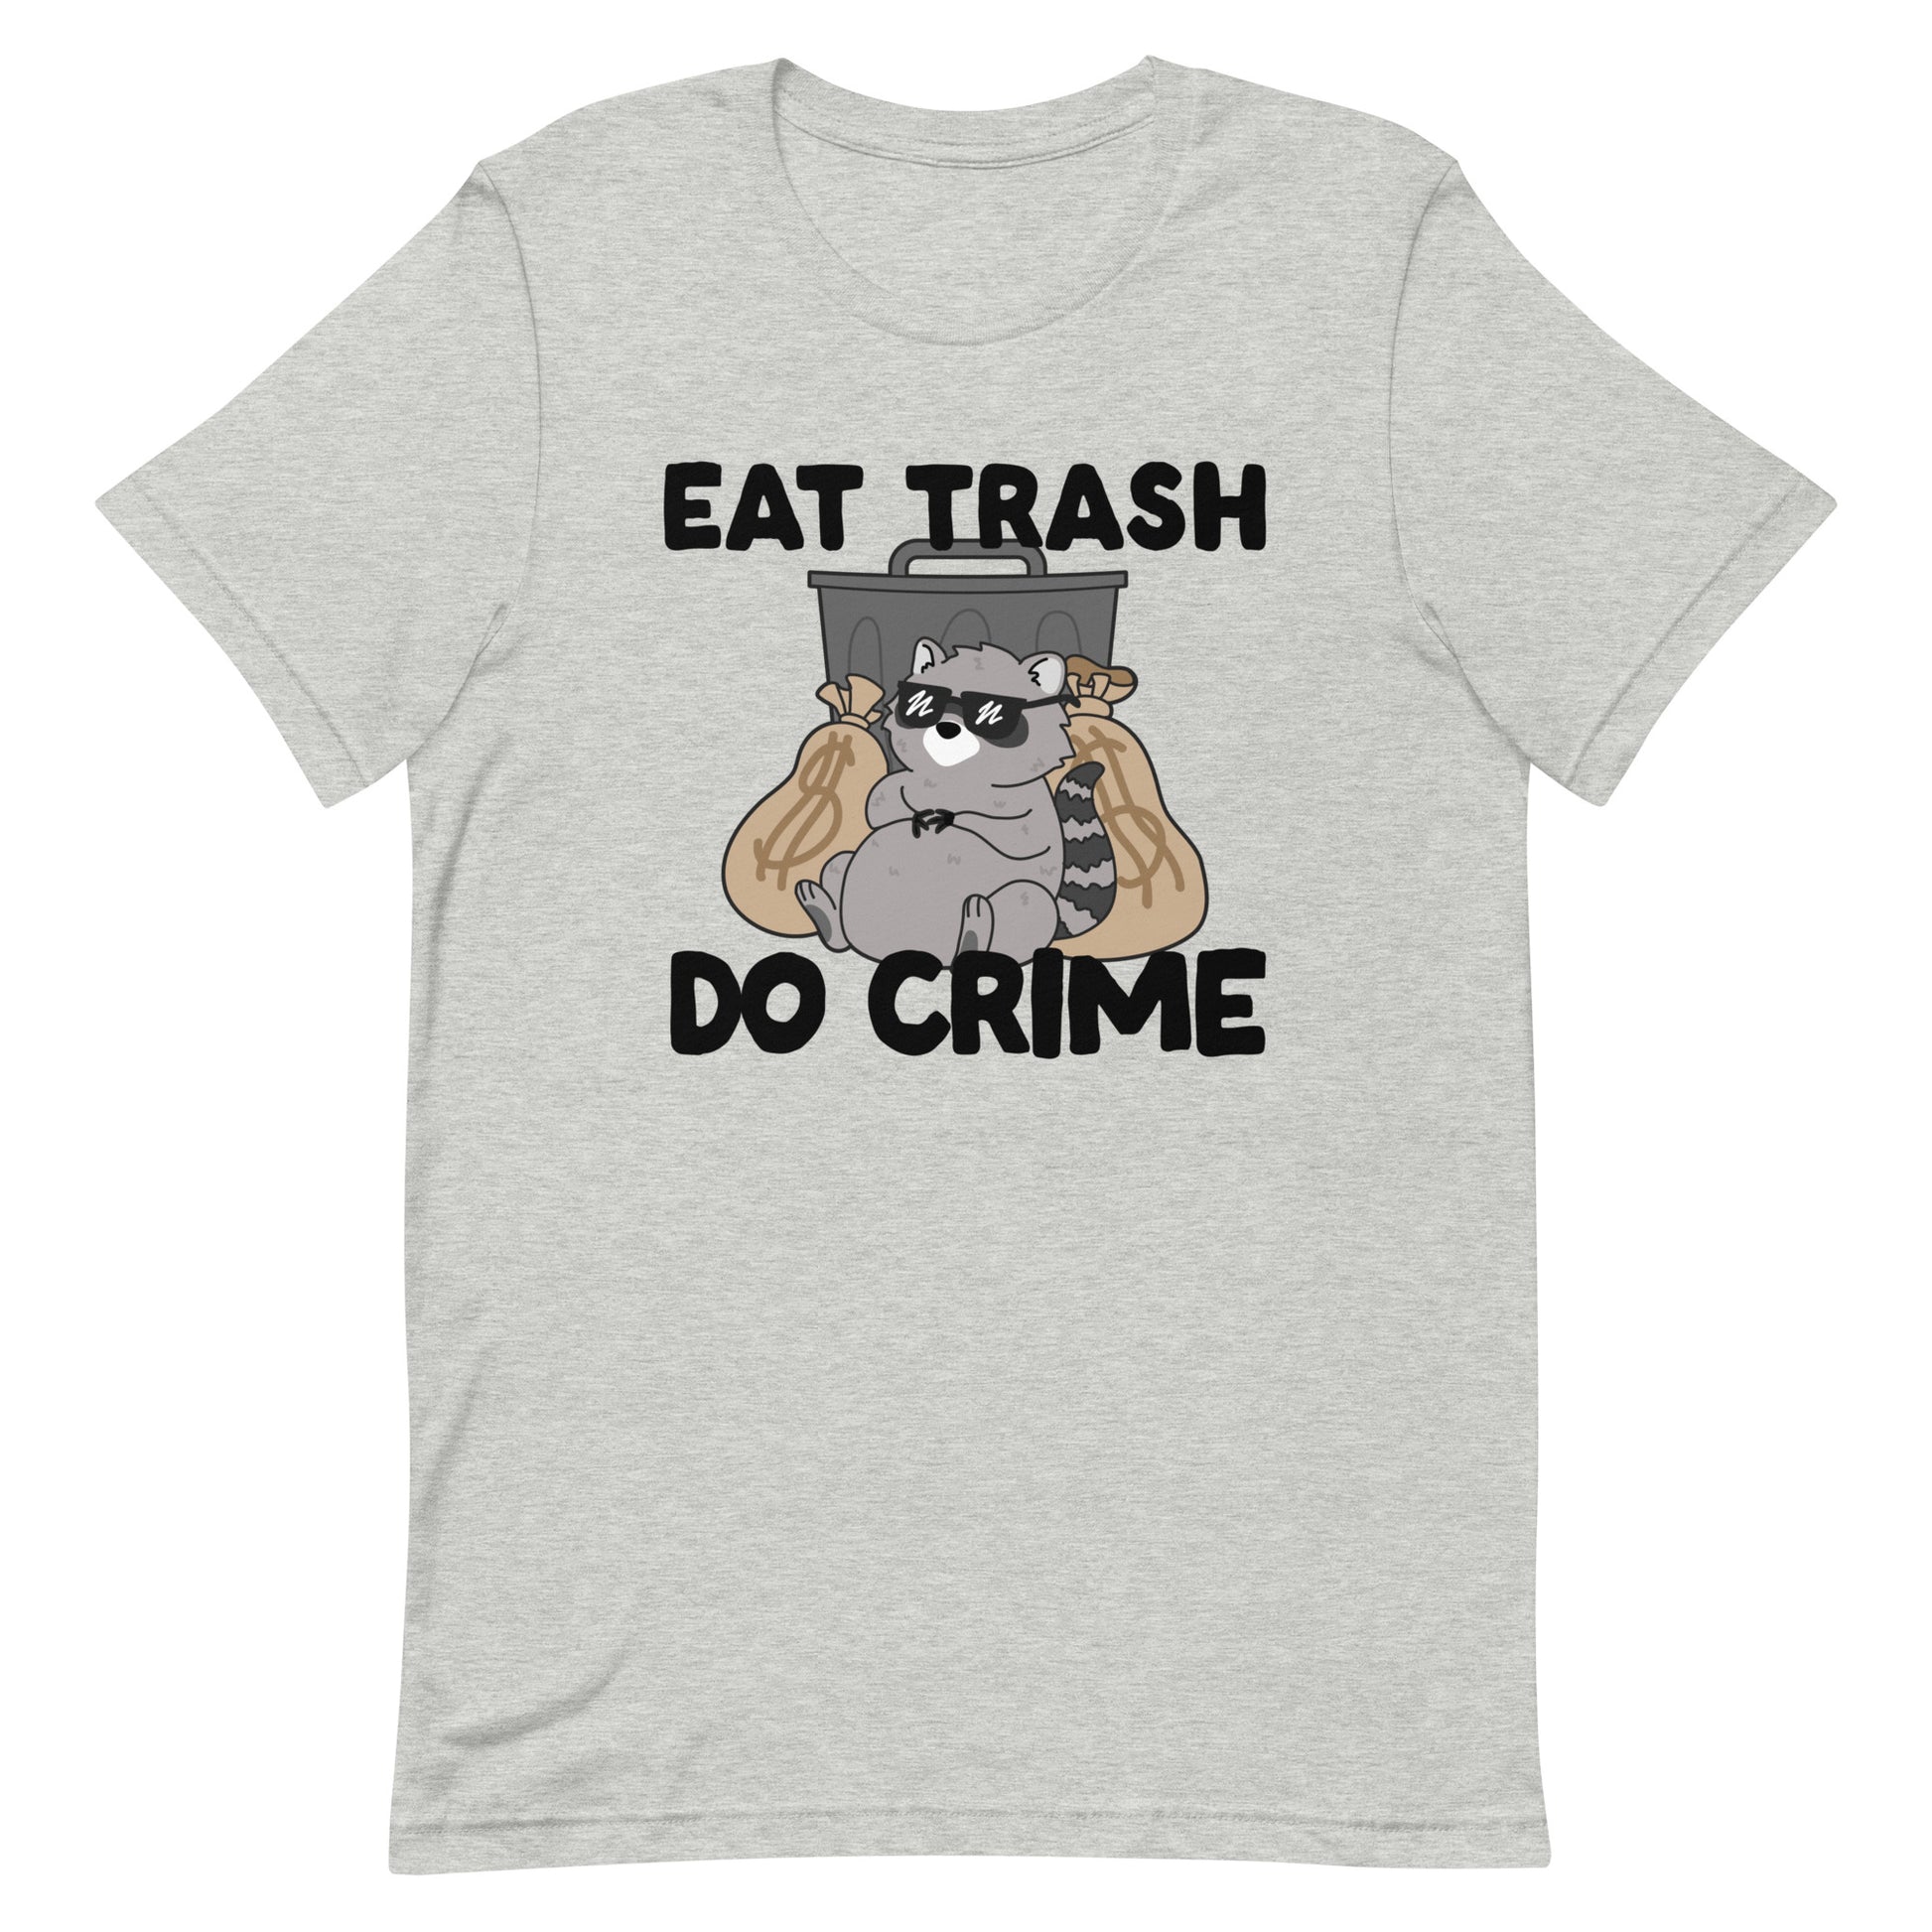 A grey crewneck t-shirt featuing an illustration of a chubby raccoon wearing sunglasses. The raccoon is laying back against a trash can and large bags of money. Text surrounding the image reads "Eat trash. Do crime."